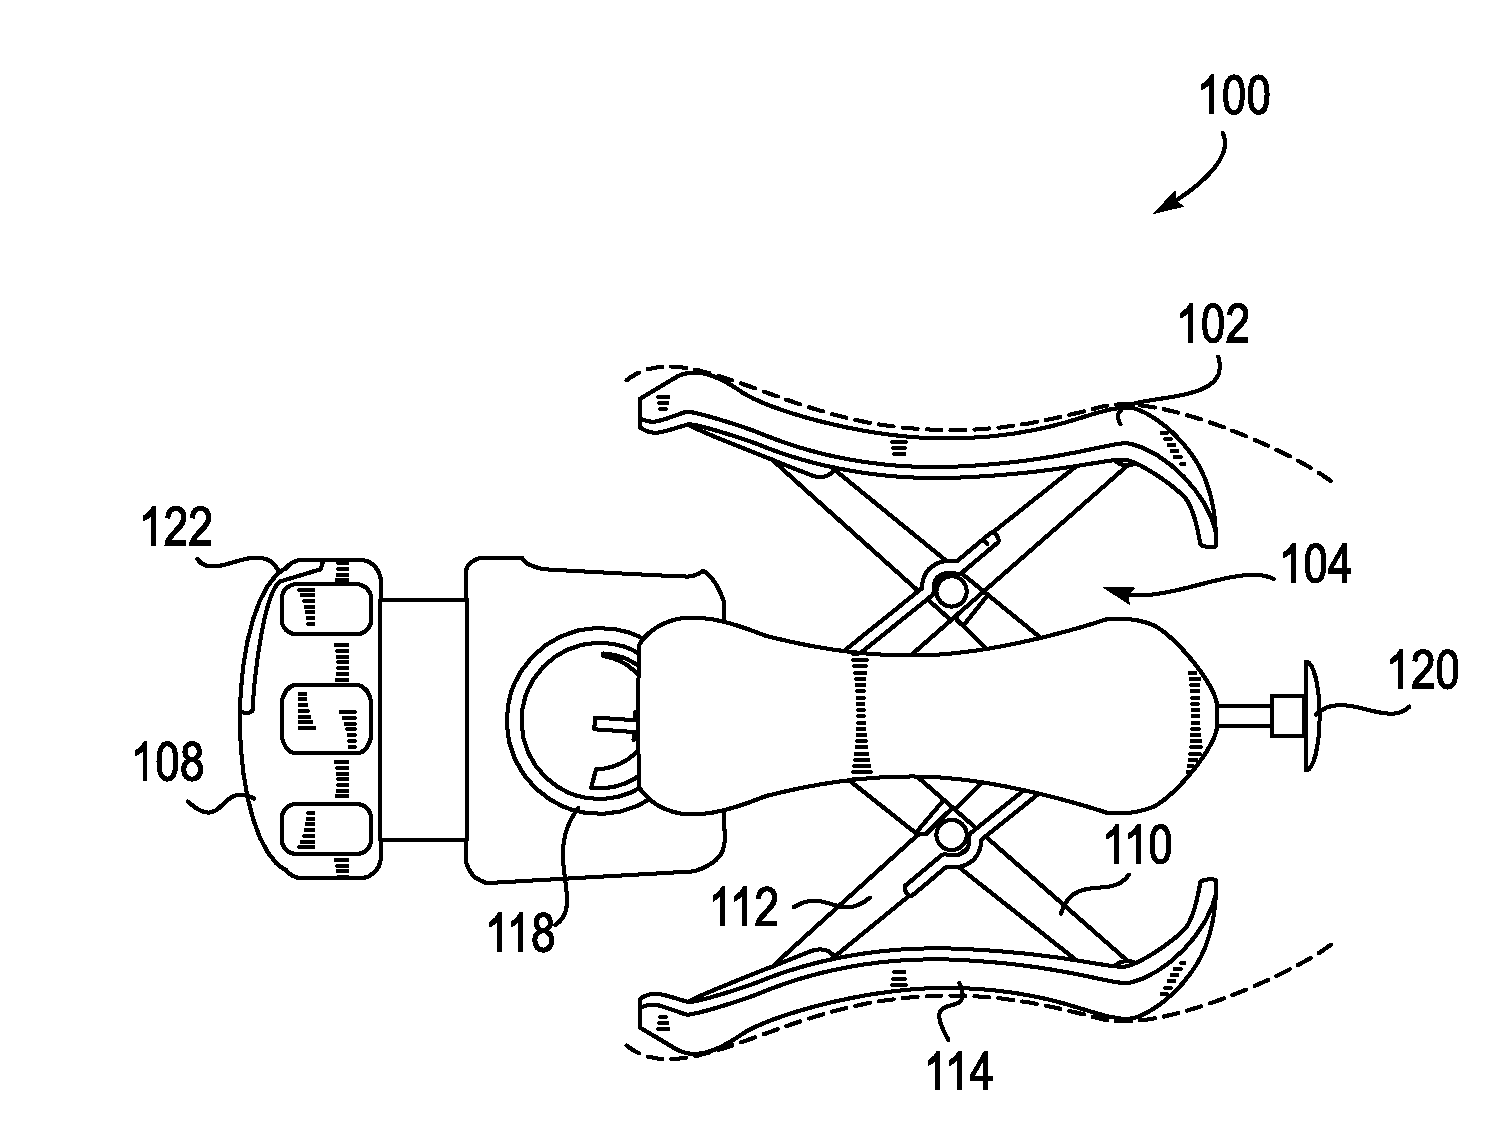 Methods and apparatus for preventing vaginal lacerations during childbirth